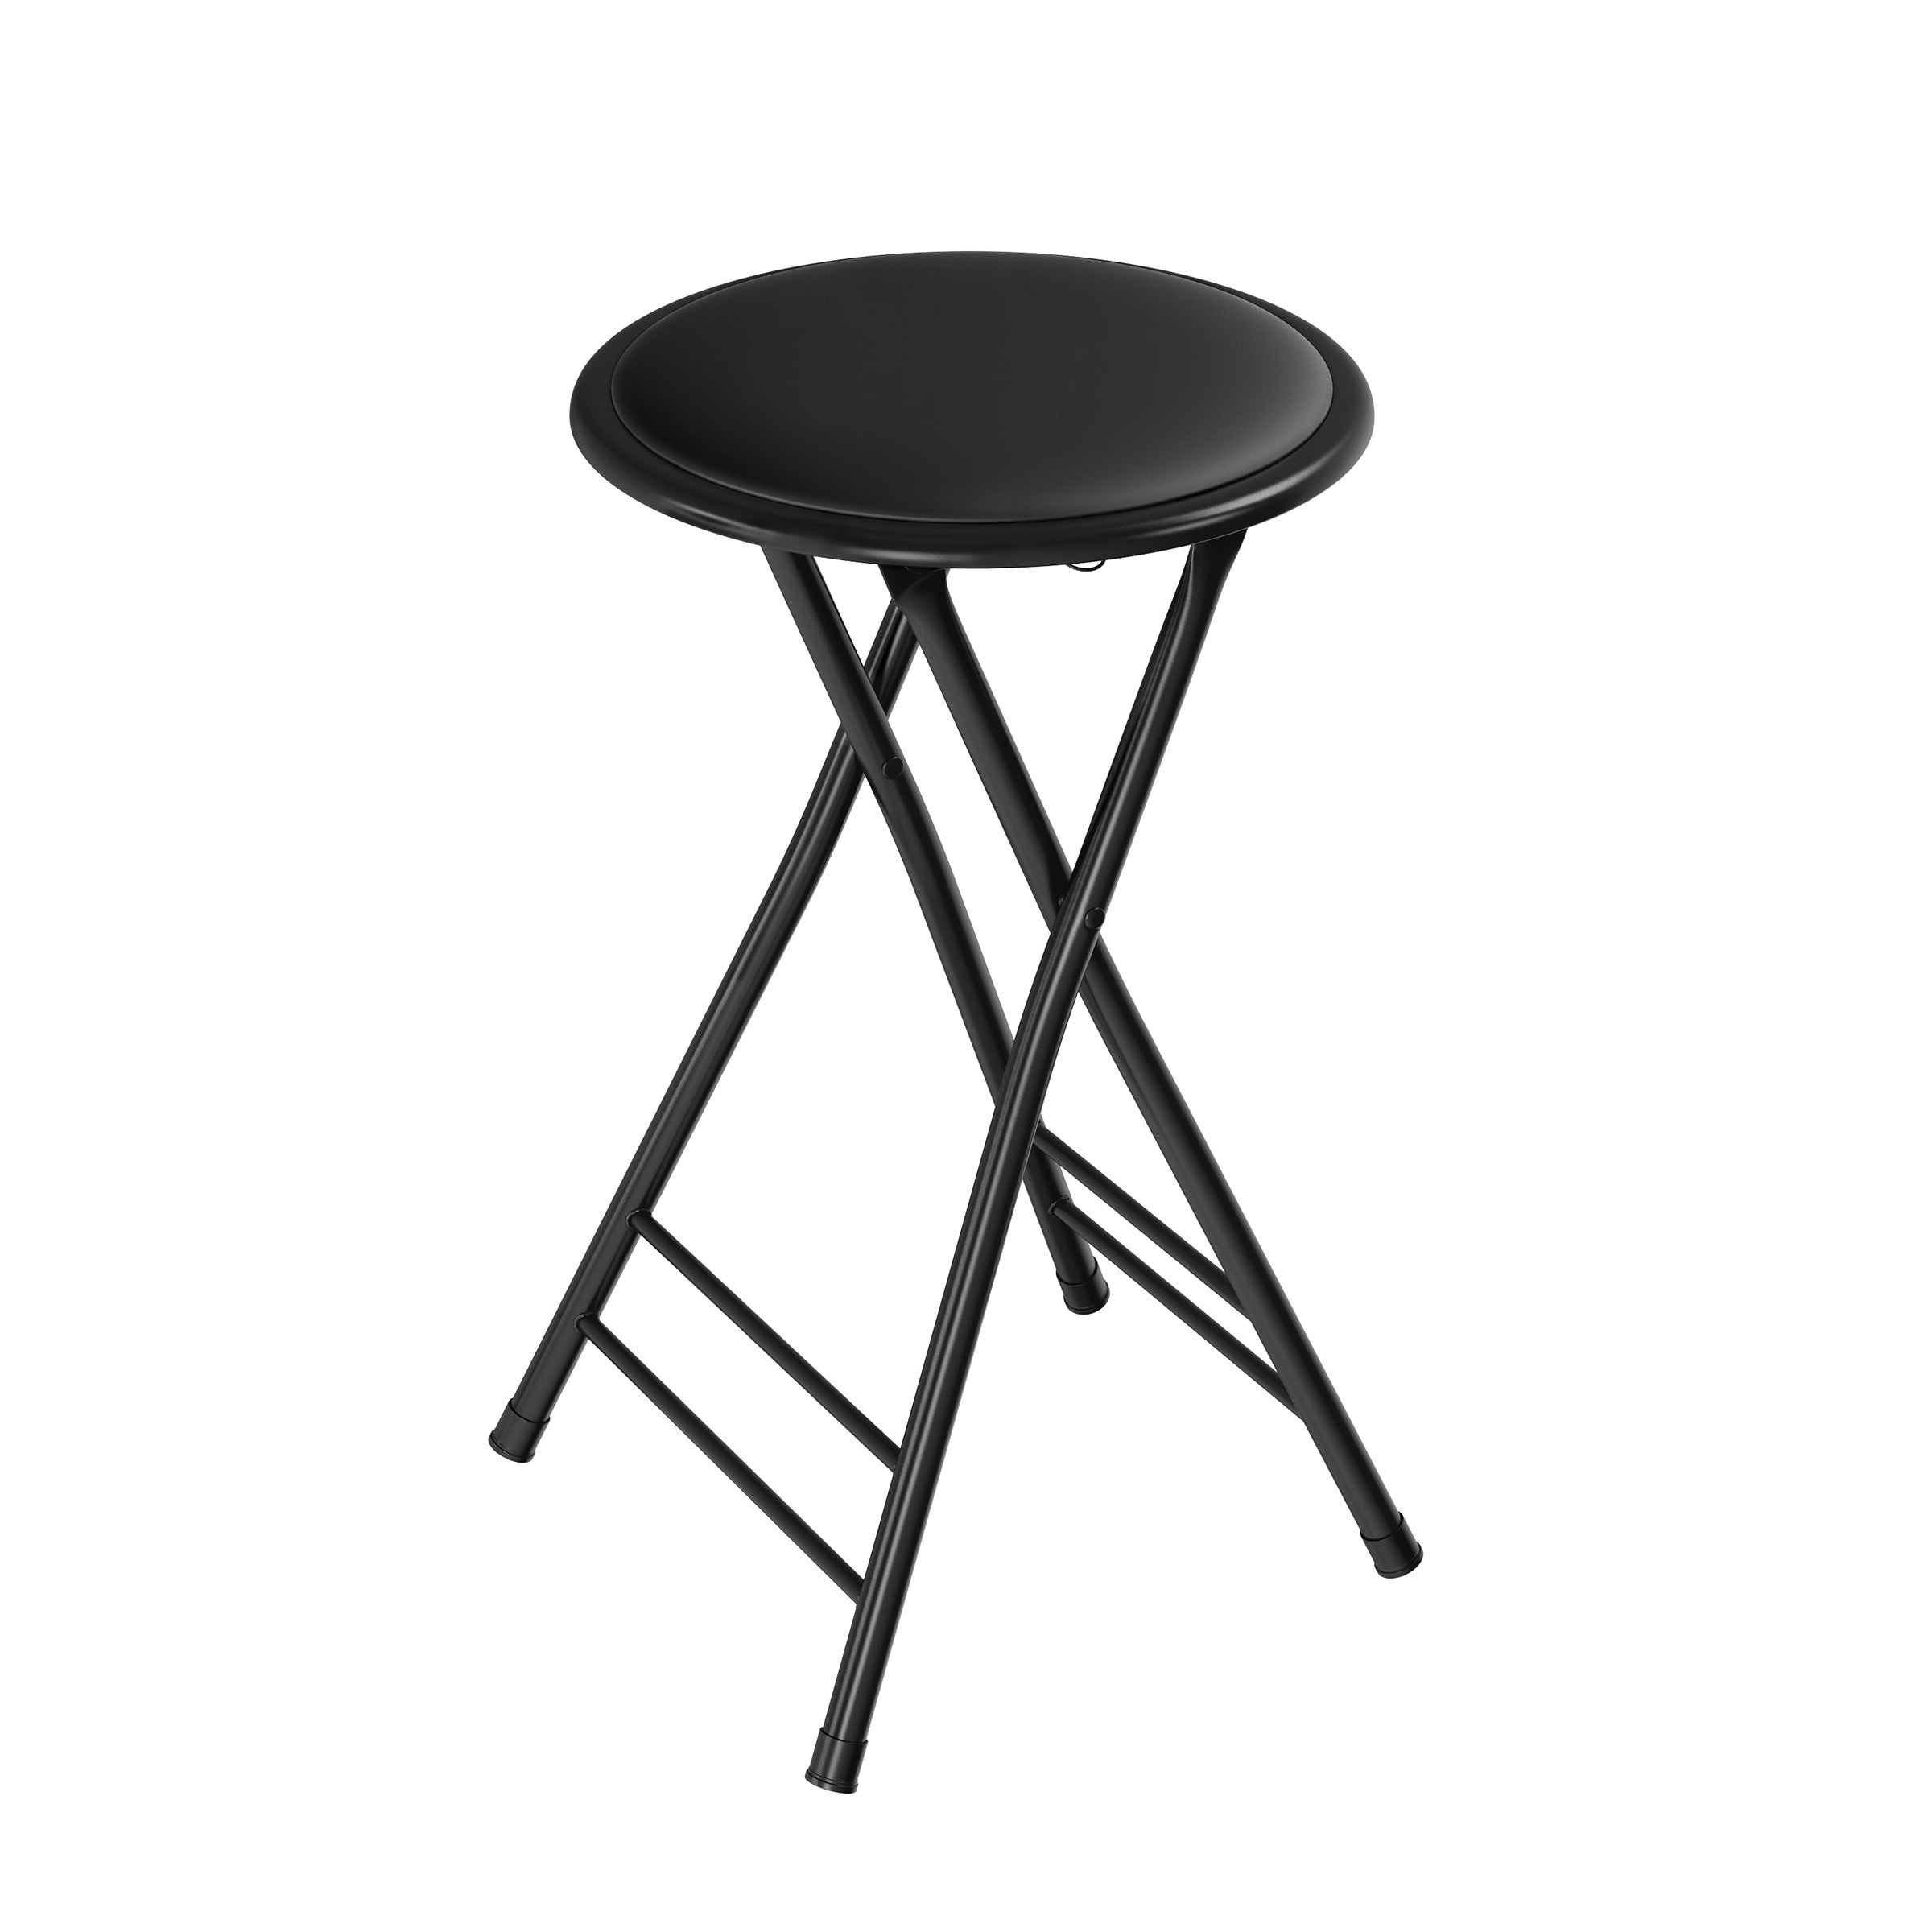 Hastings Home 24 Round Folding Stool with Padded Seat - Black